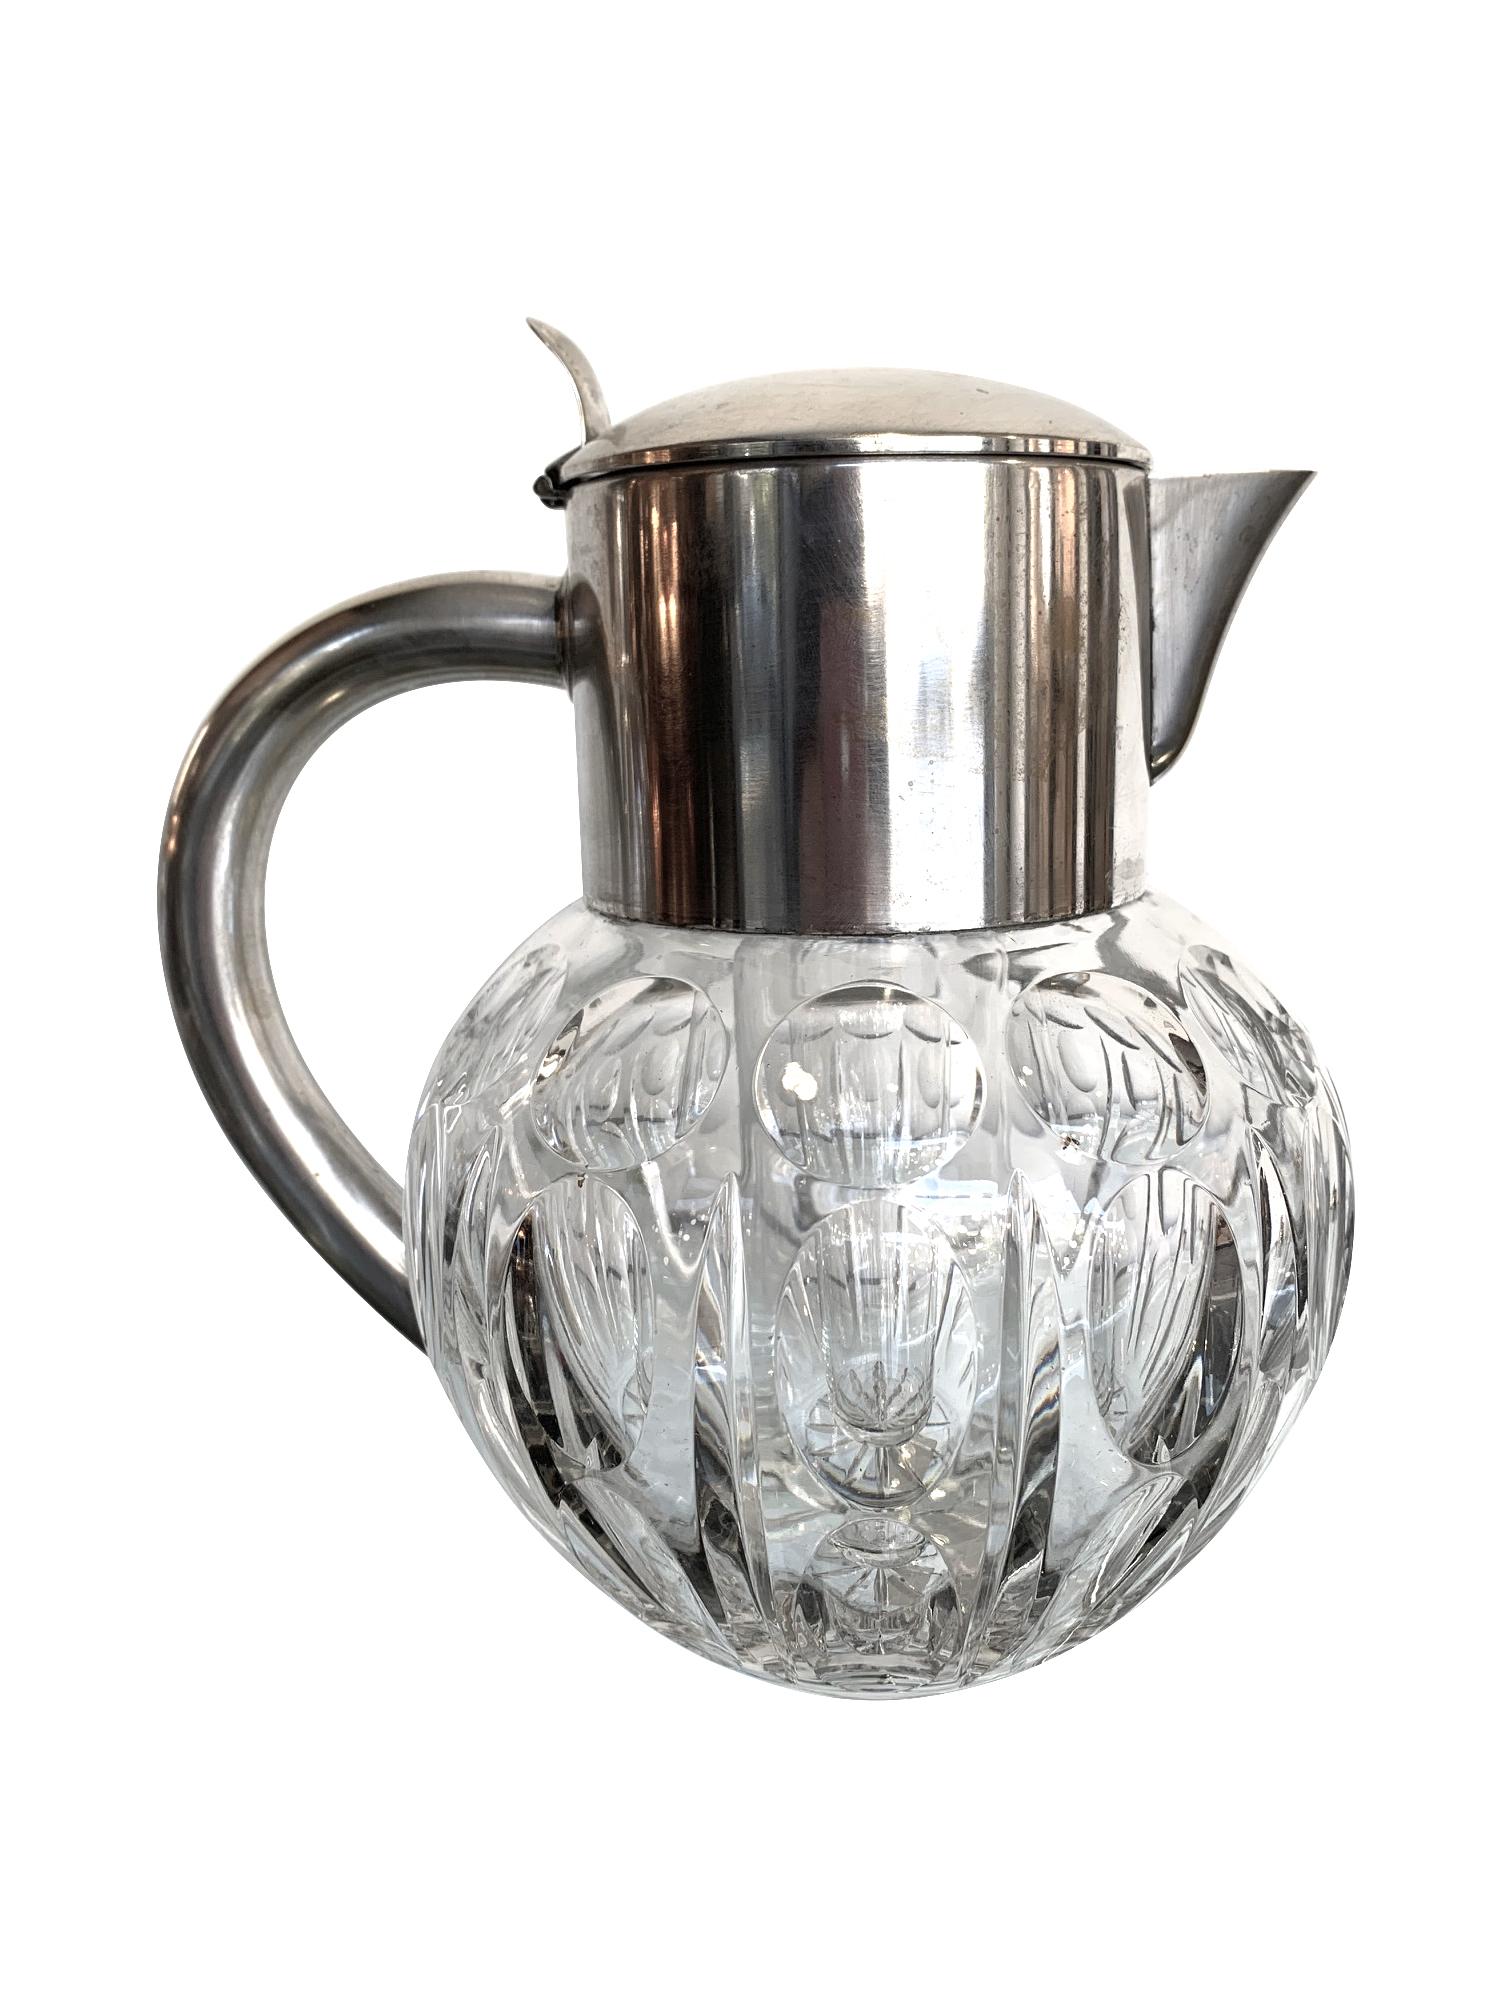 A WMF silver plated crystal lemonade / cocktail jug engraved with circle motifs. Mounted with a hinged silver plated lid and handle that opens to reveal the central glass ice compartment. Stamped on the back 